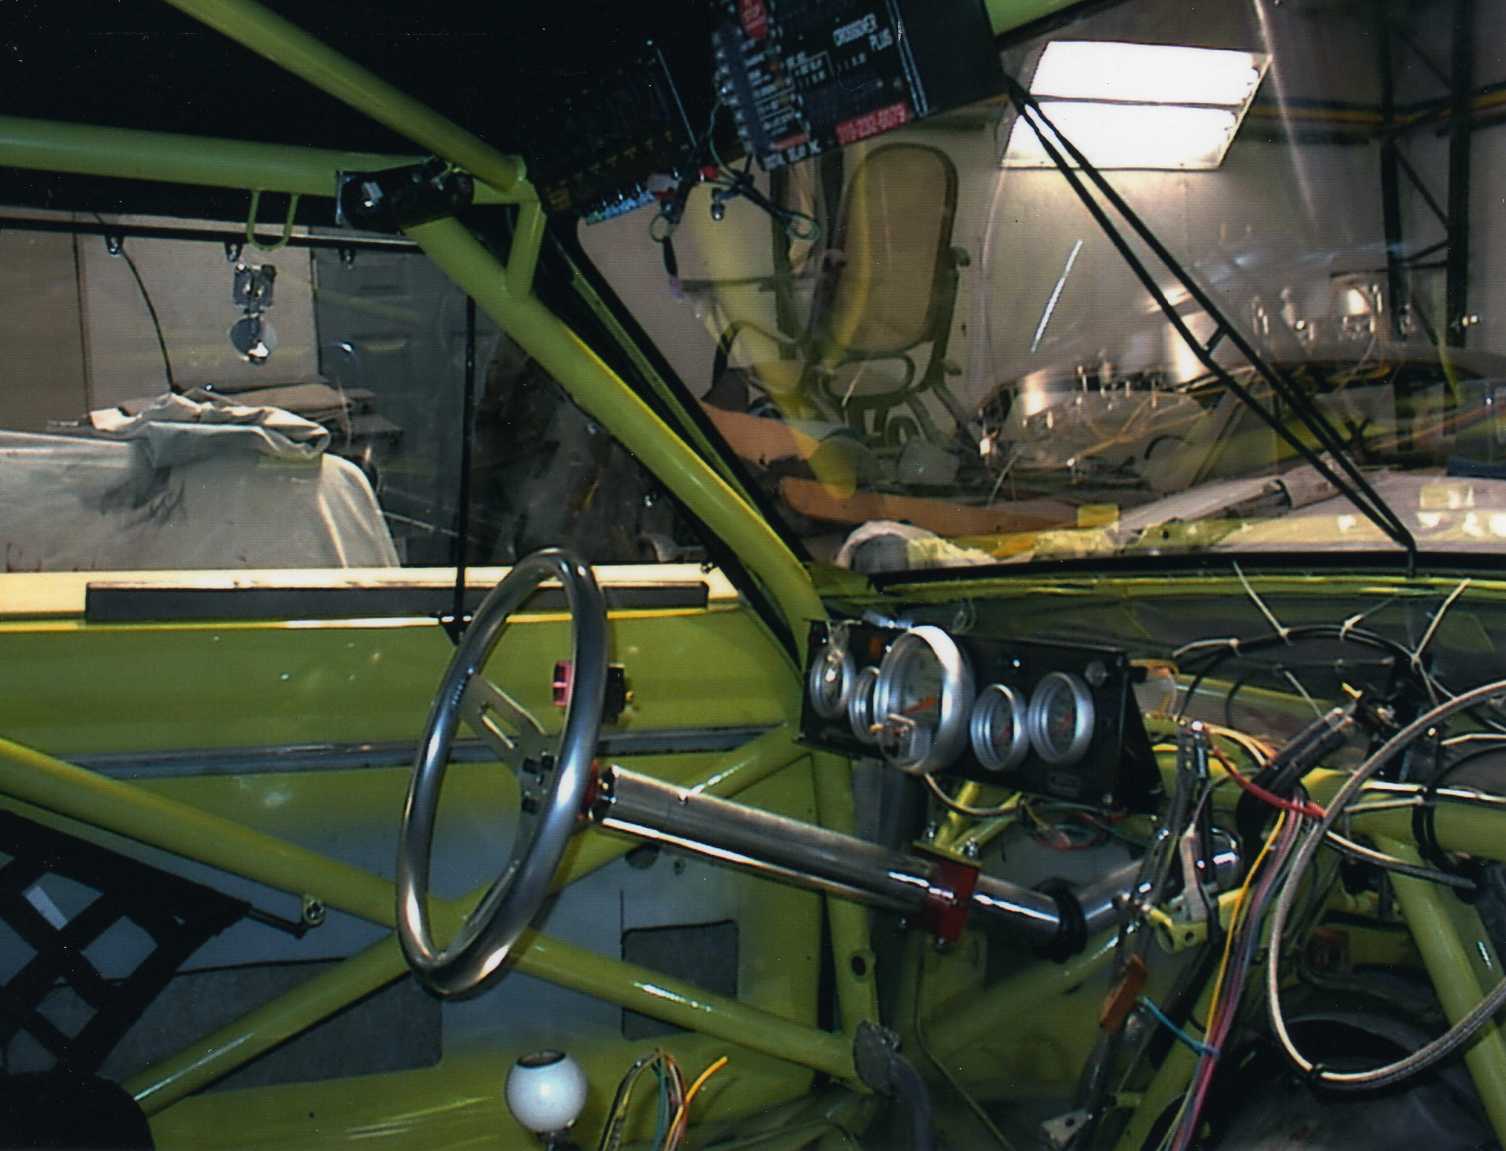 The wiring done by McKellar next to the steering column.